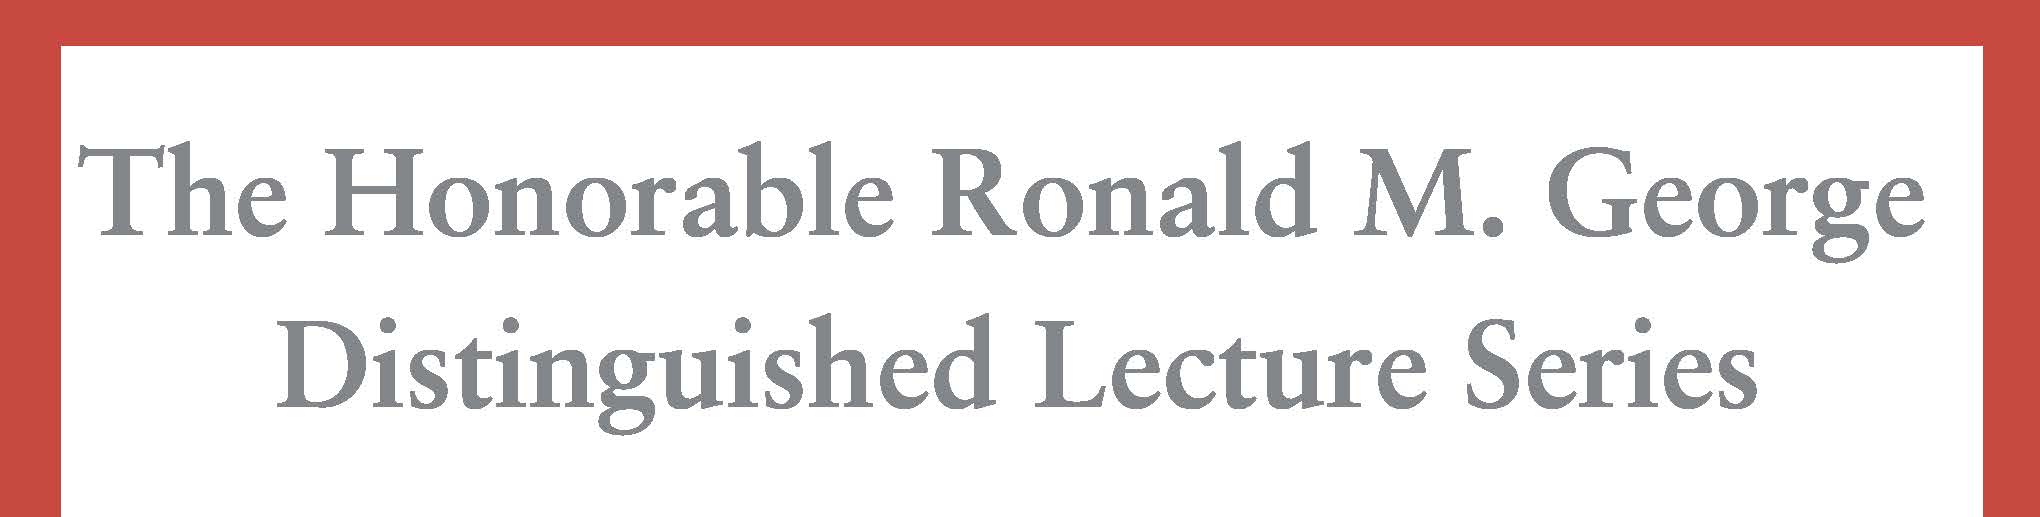 Ronald M. George Distinguished Lecture Series